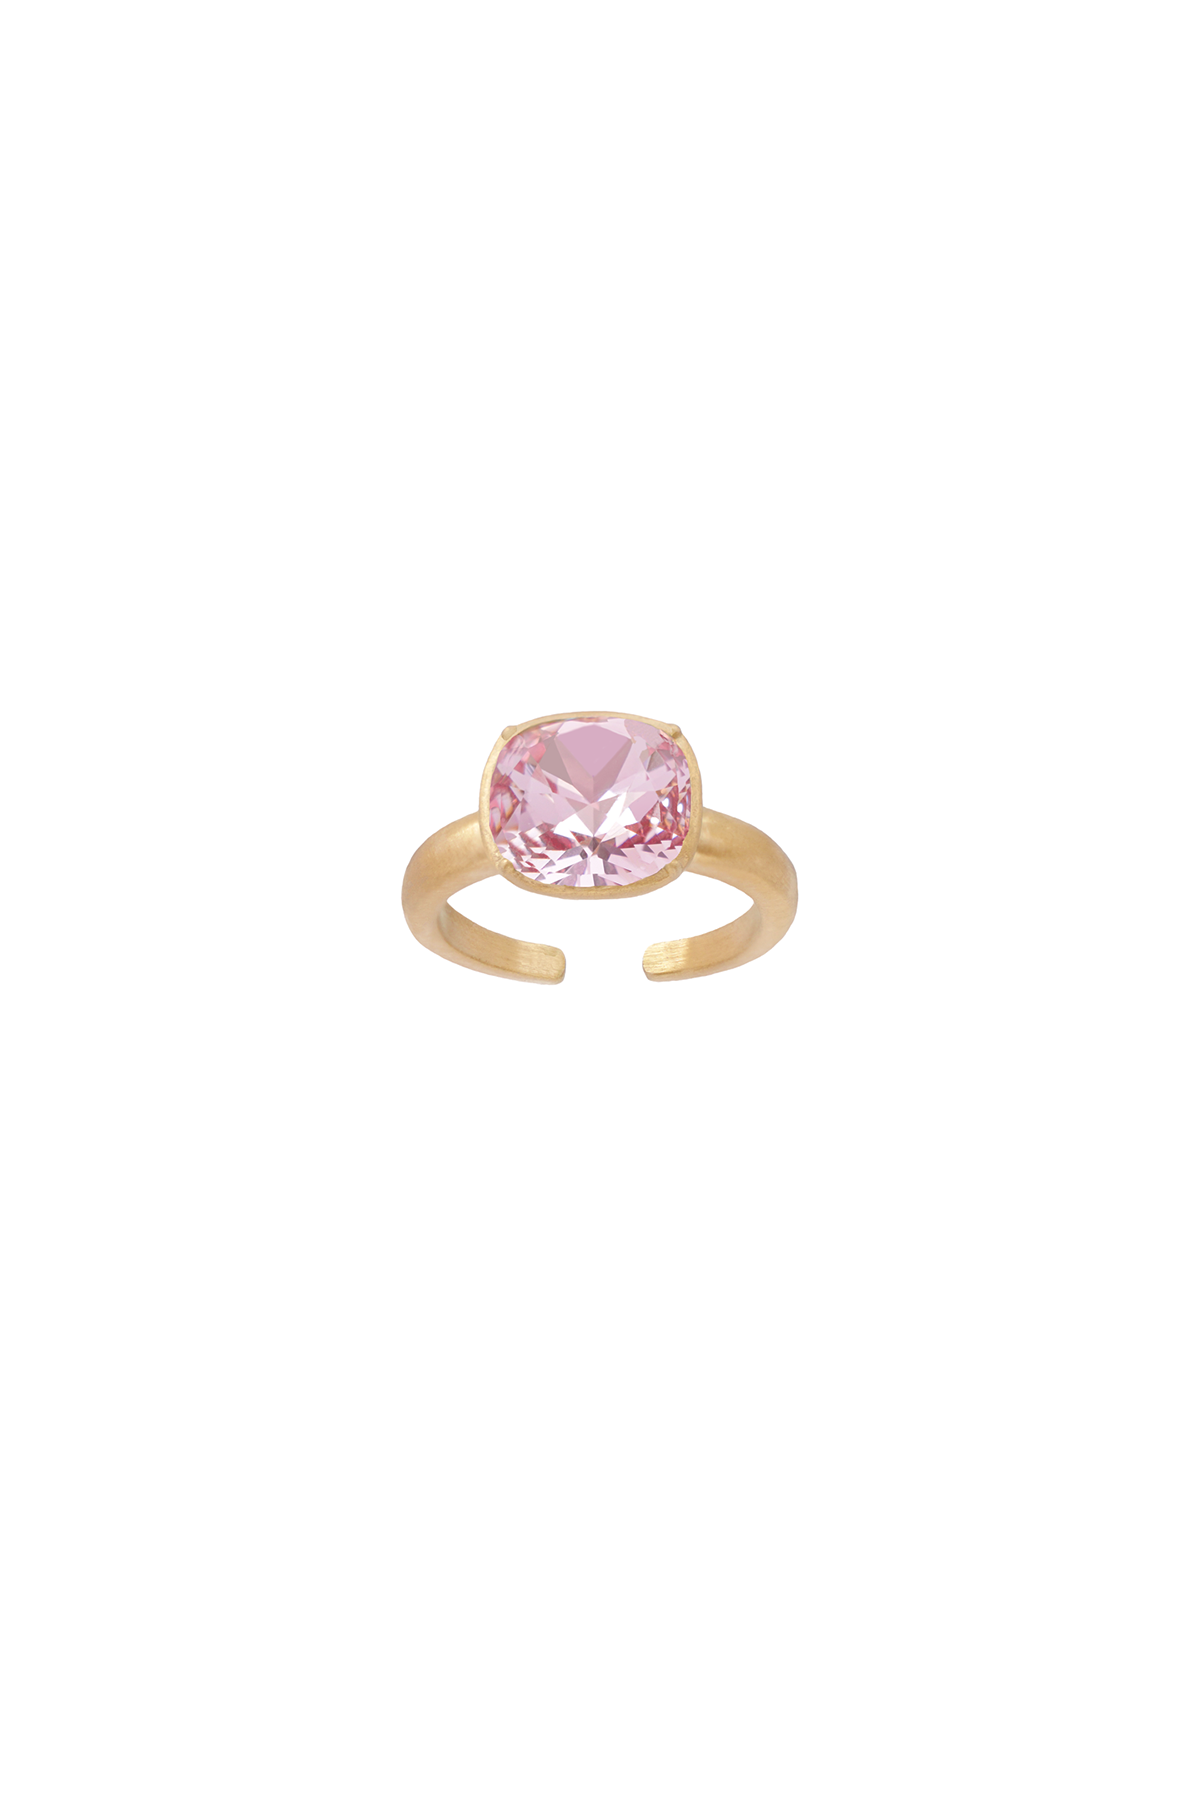 Carla Crystal ring - Pink favourite